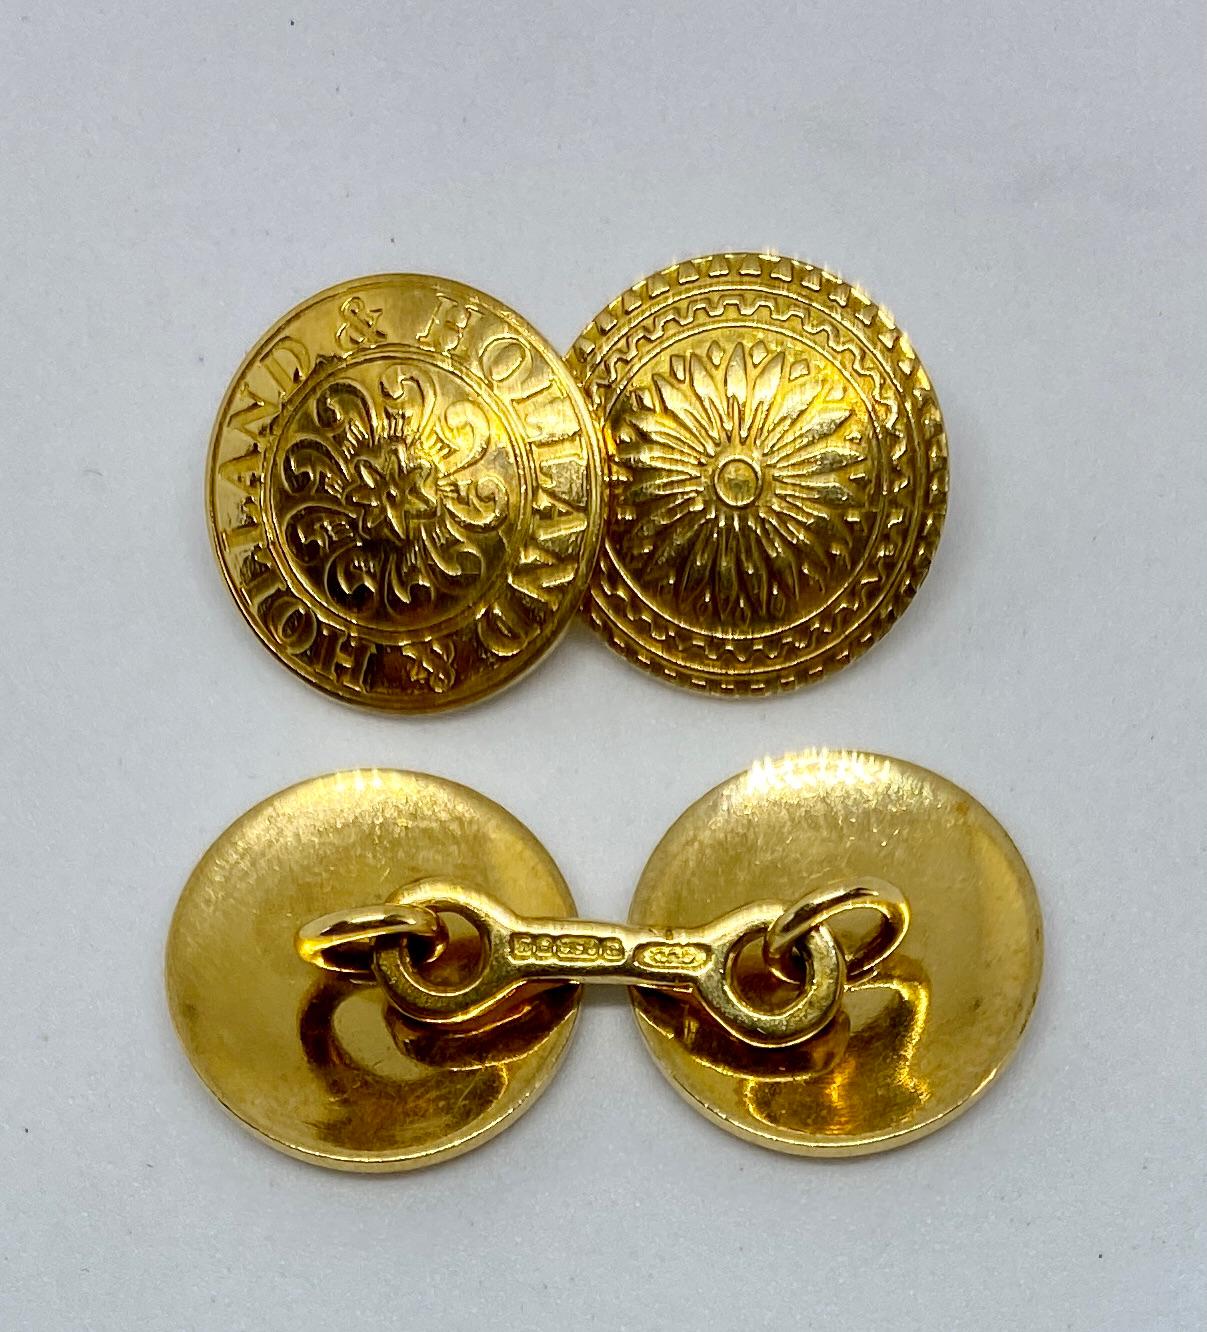 A classic, extremely rare pair of double-sided cufflinks in 18K yellow gold by the esteemed British firm of Holland & Holland. 

Each of the four faces measures 14.1 mm in diameter and features an elaborate yet subtle classical design. One-half of